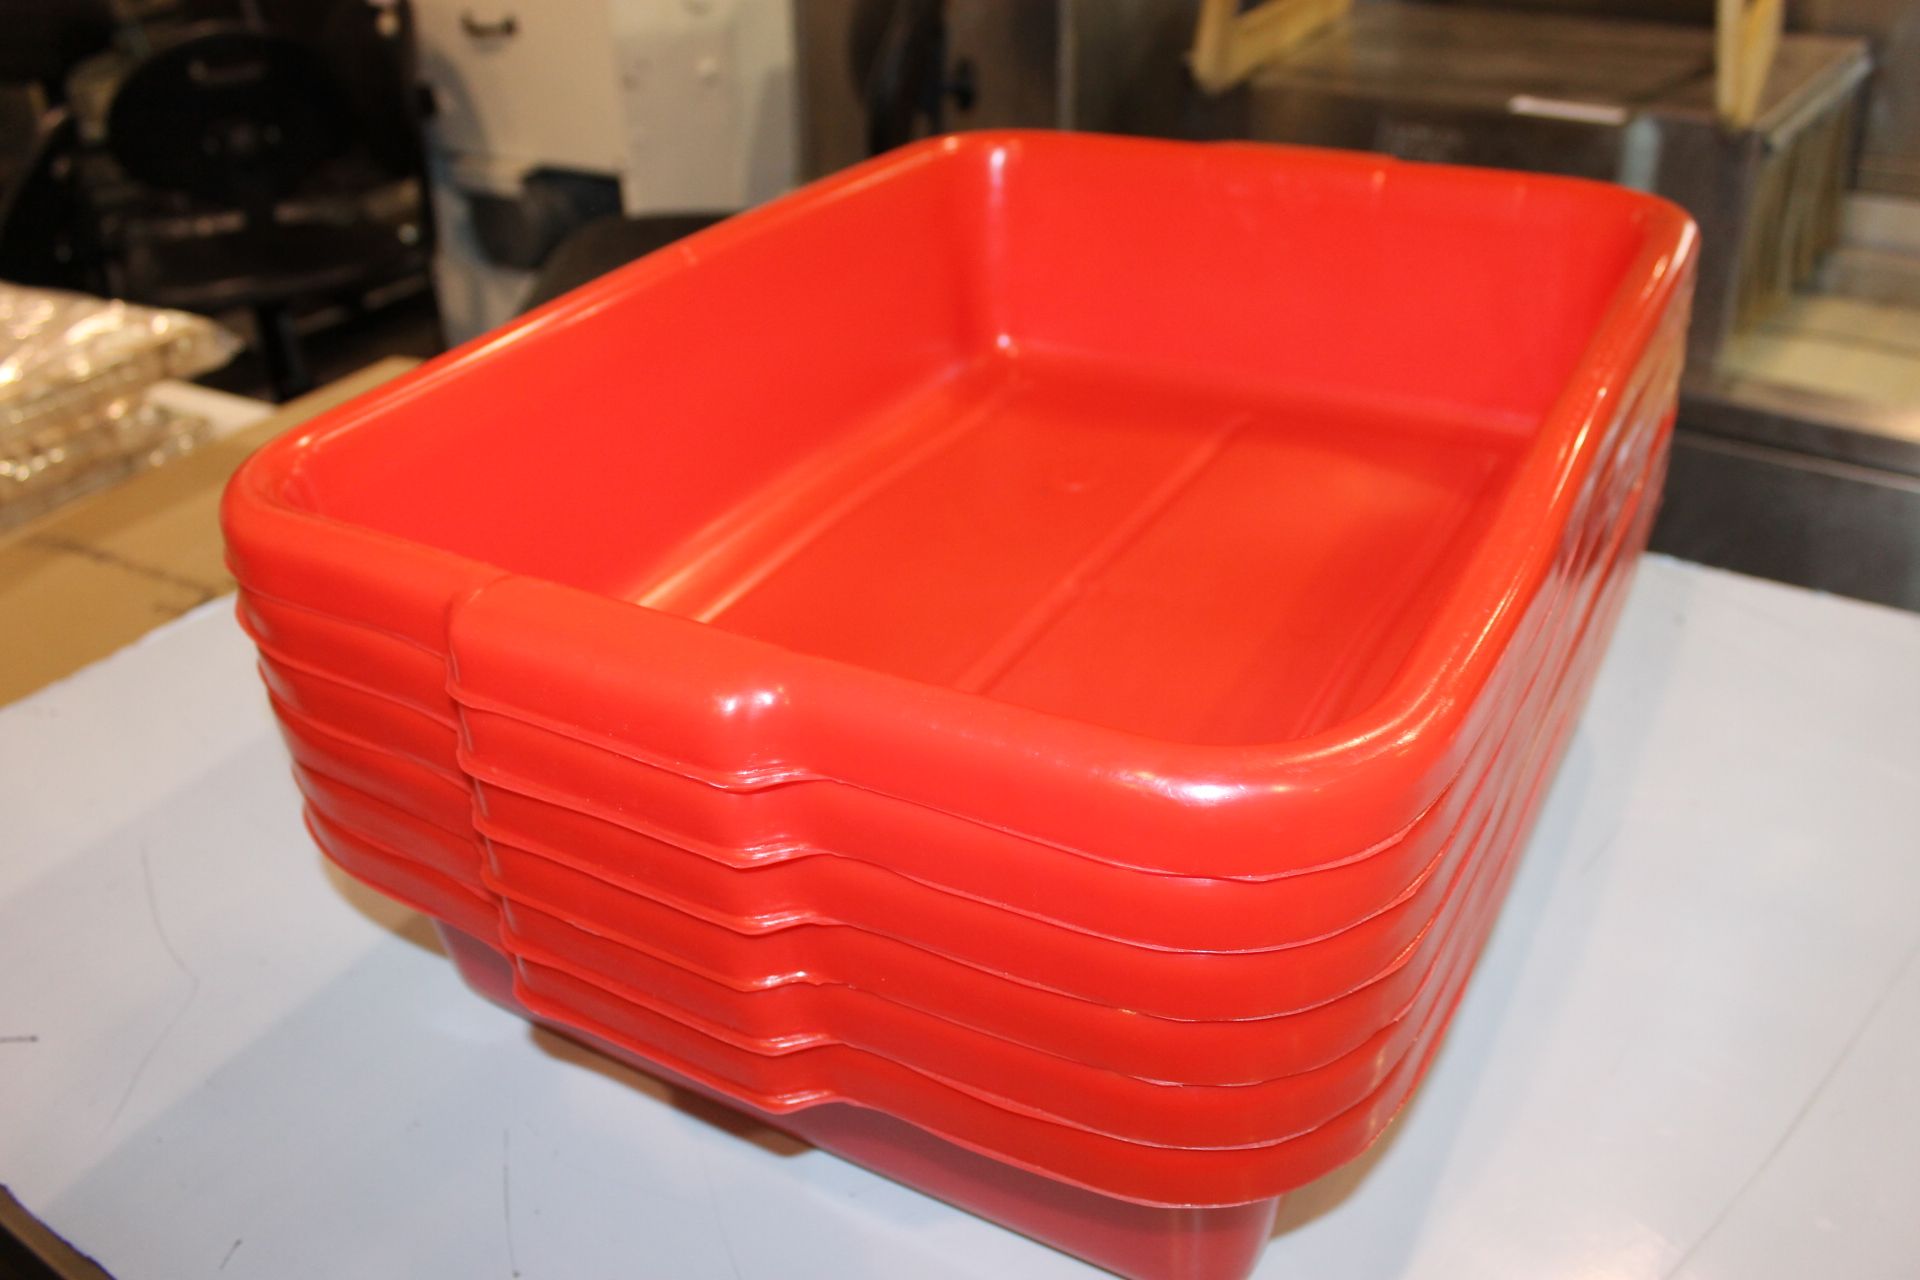 Tote Boxes, 22"W x 15-3/4"D x 5-1/4"H, heavy duty polyethylene, red - lot of 6